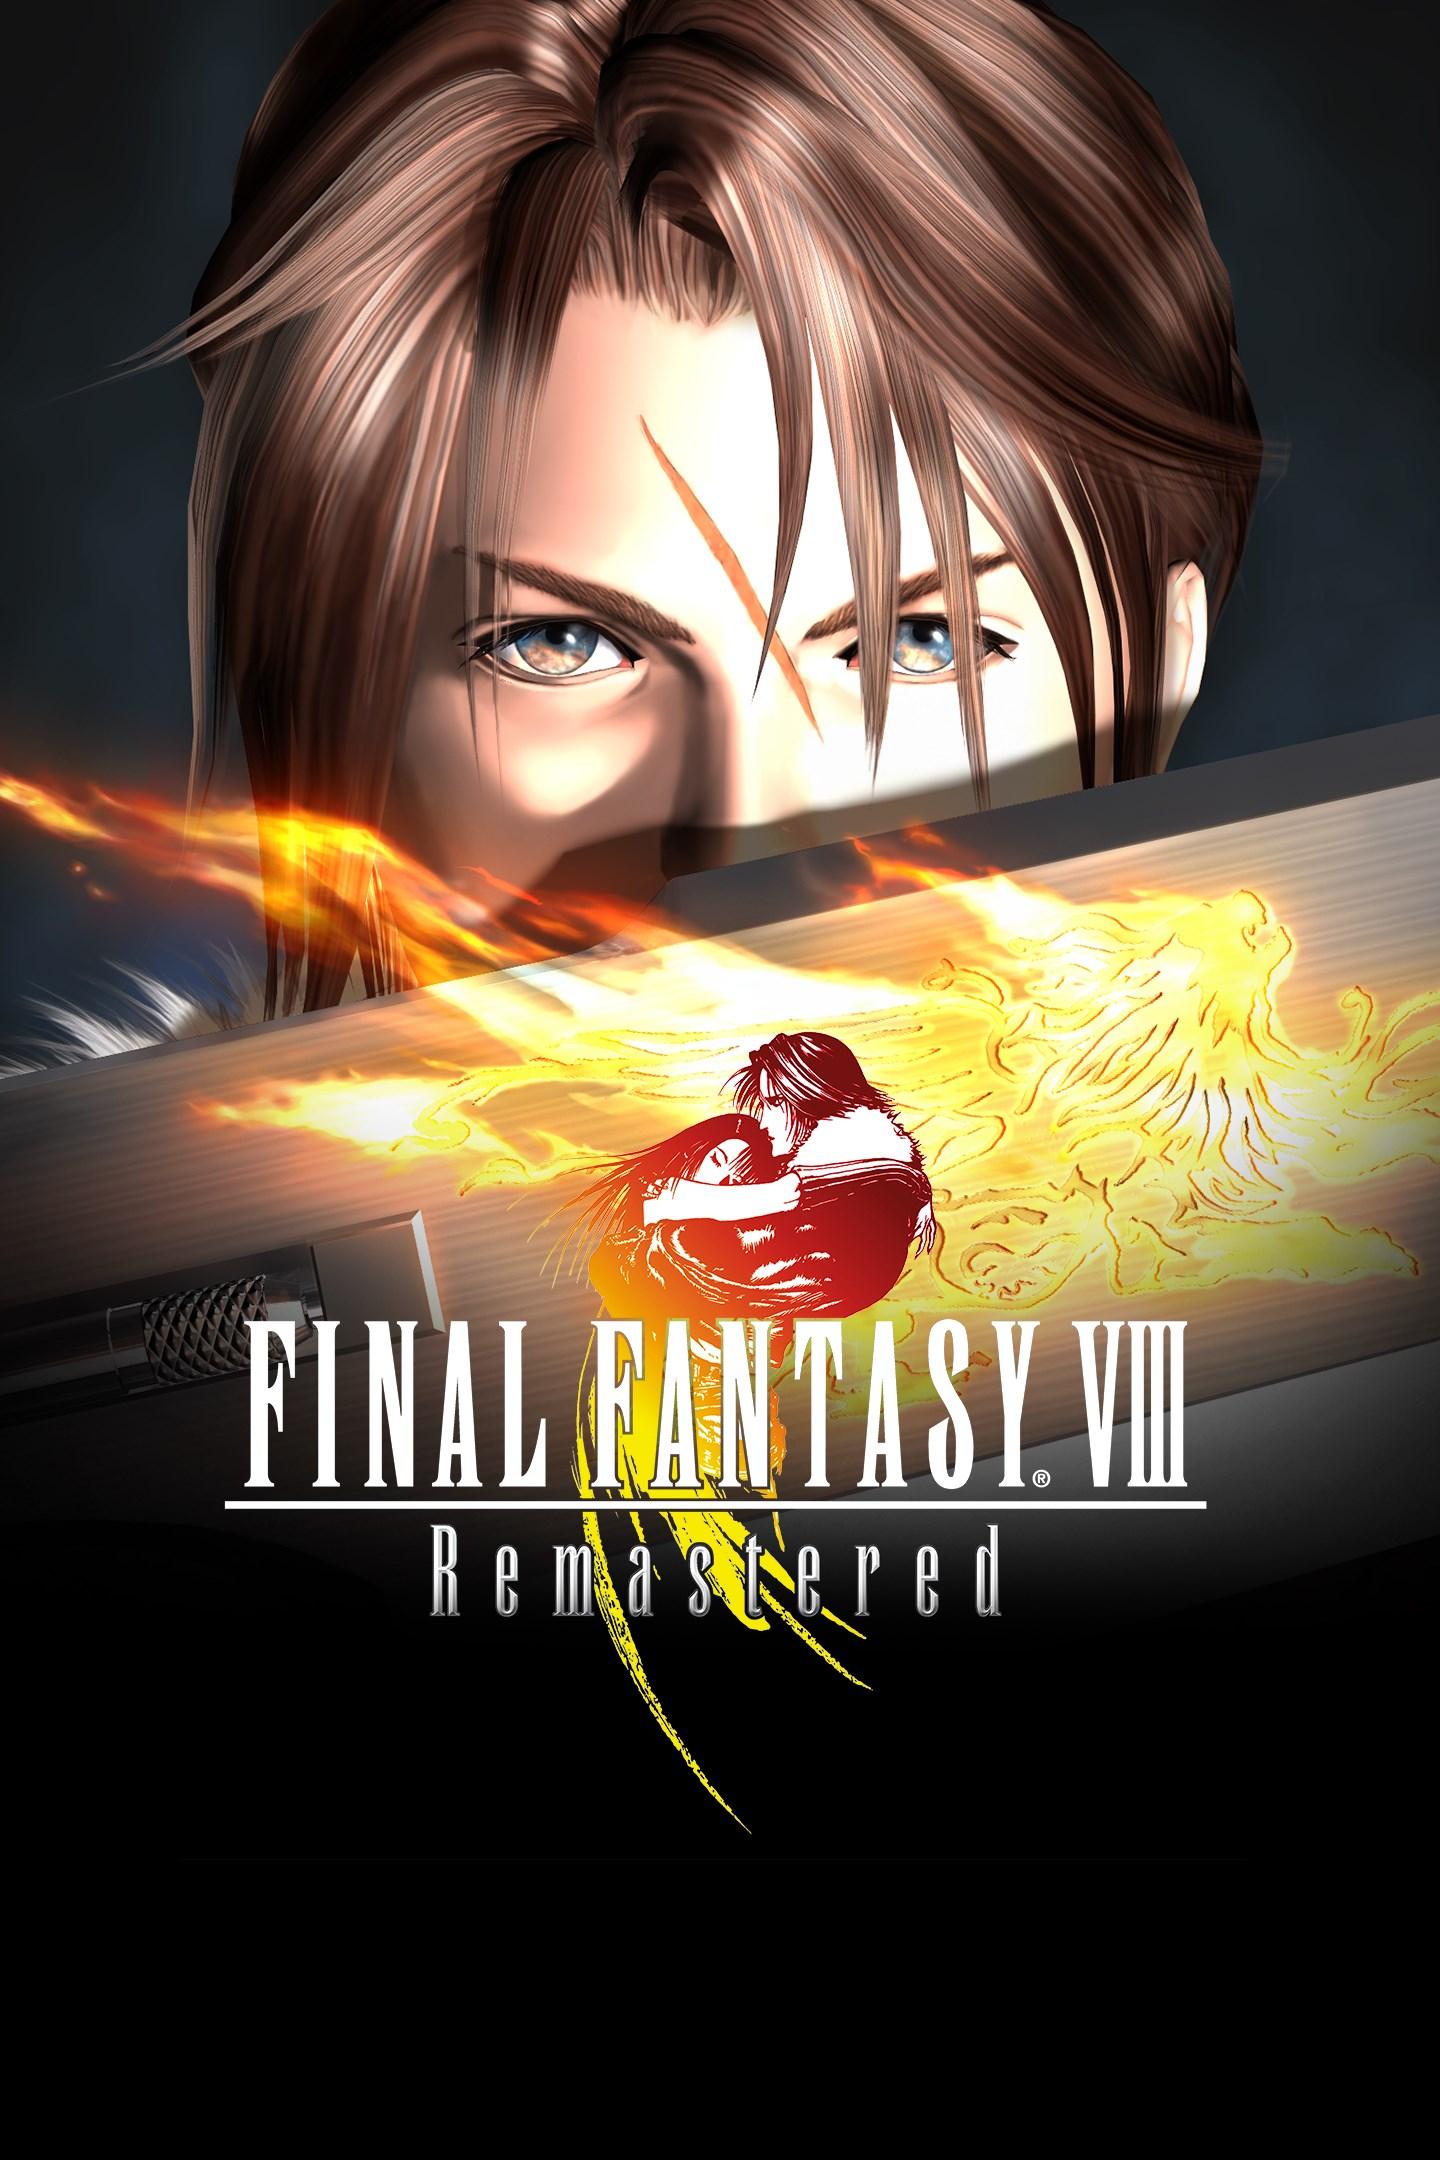 Europe: Final Fantasy VII and VIII twin pack announced for